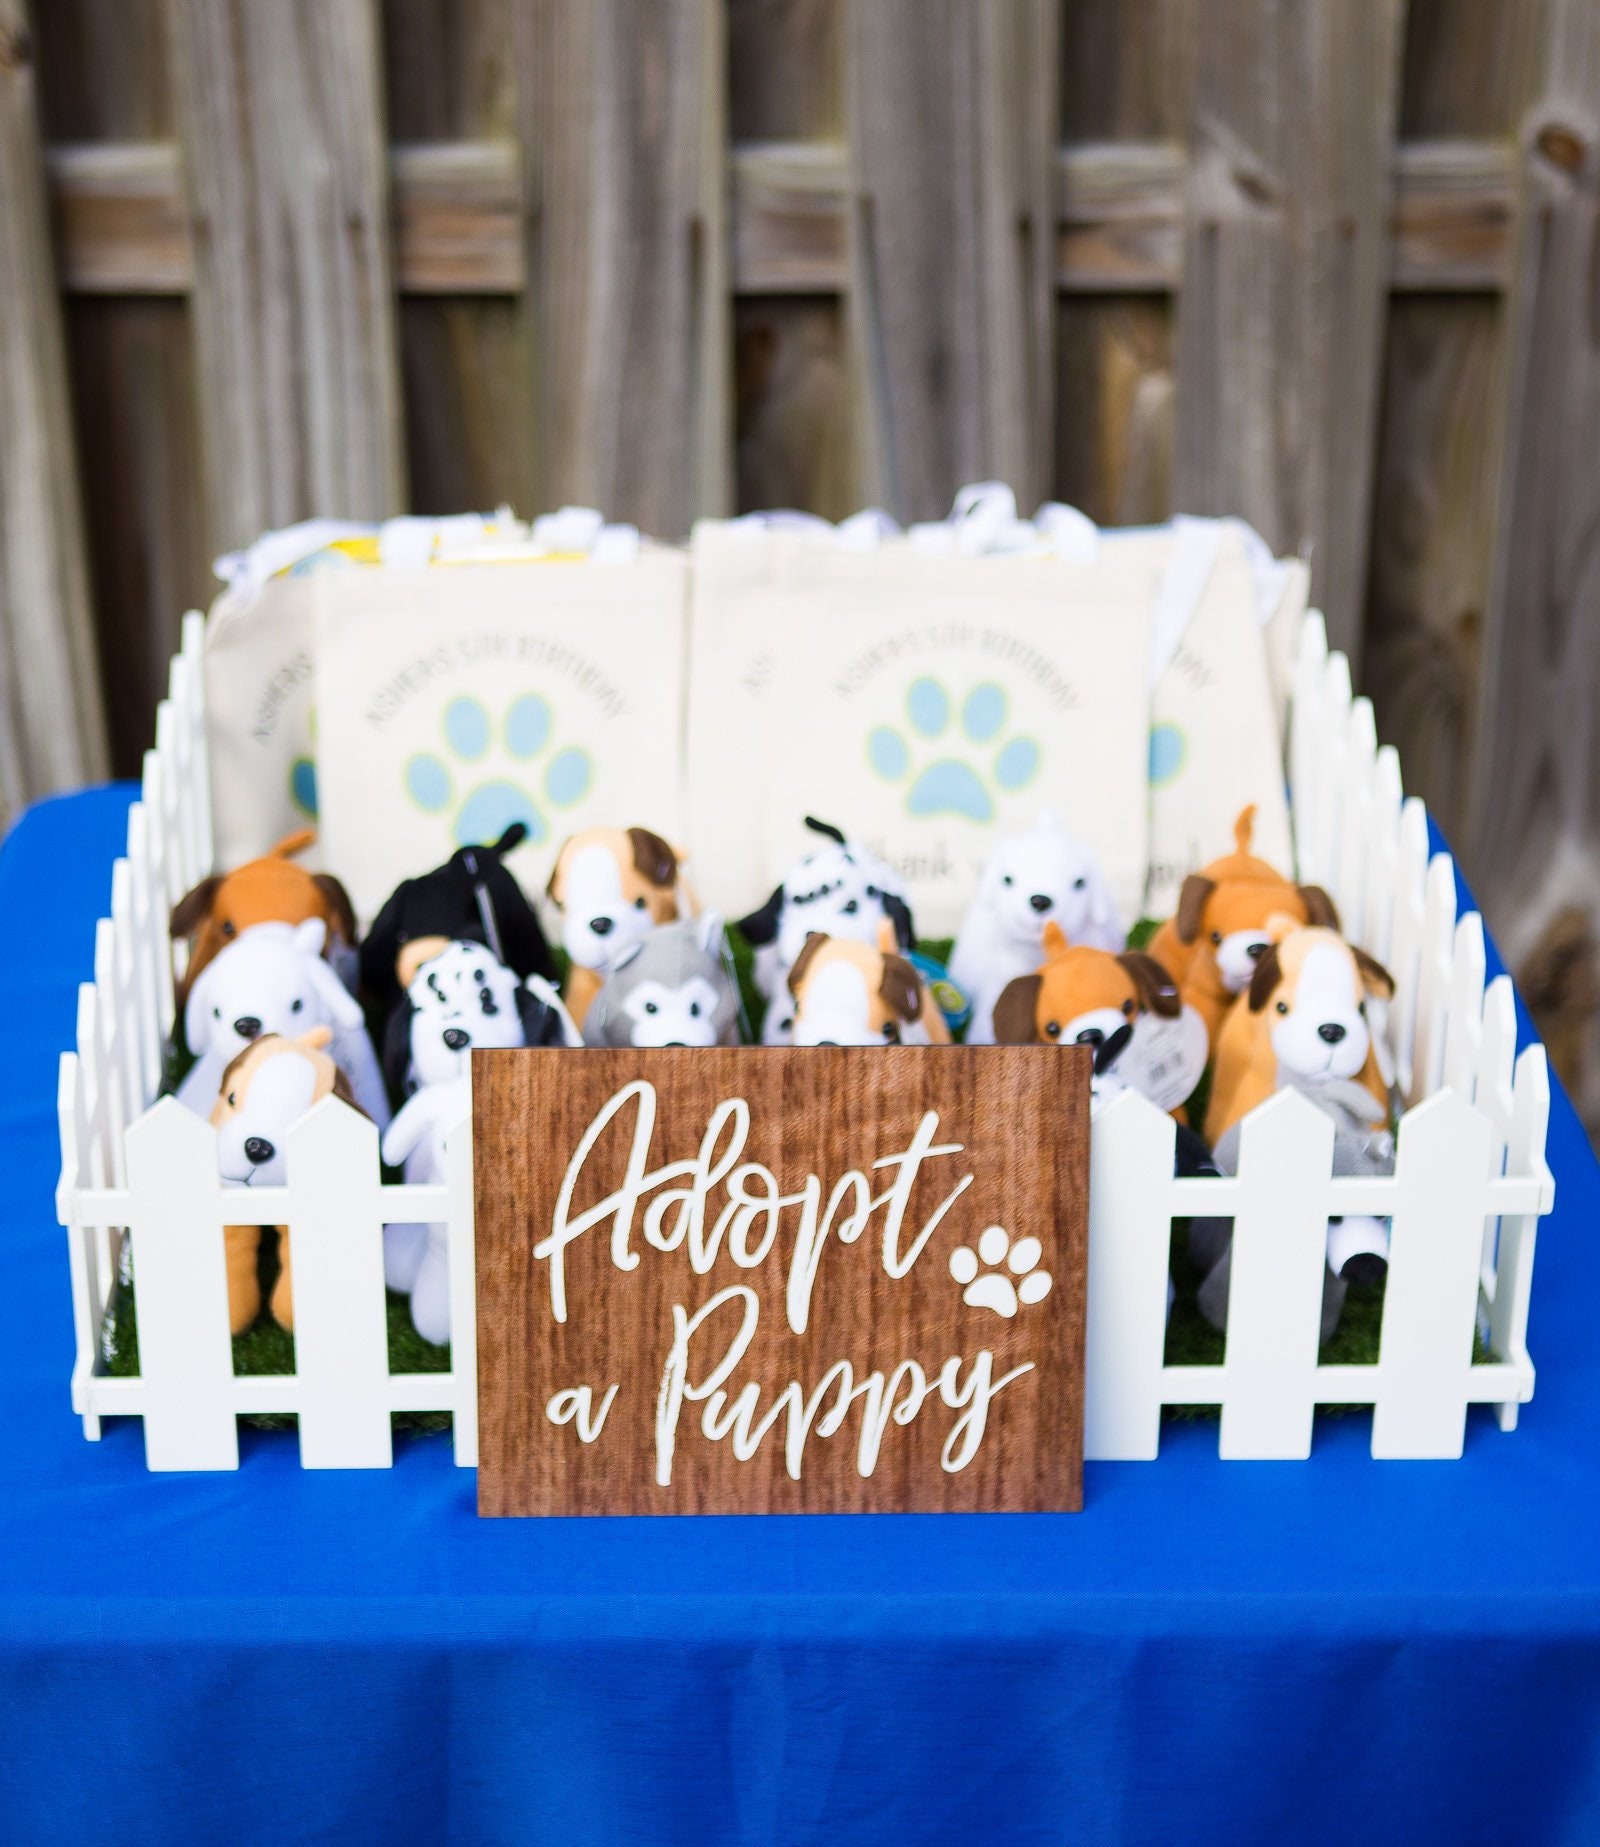 Free pet birthday party supplies samples